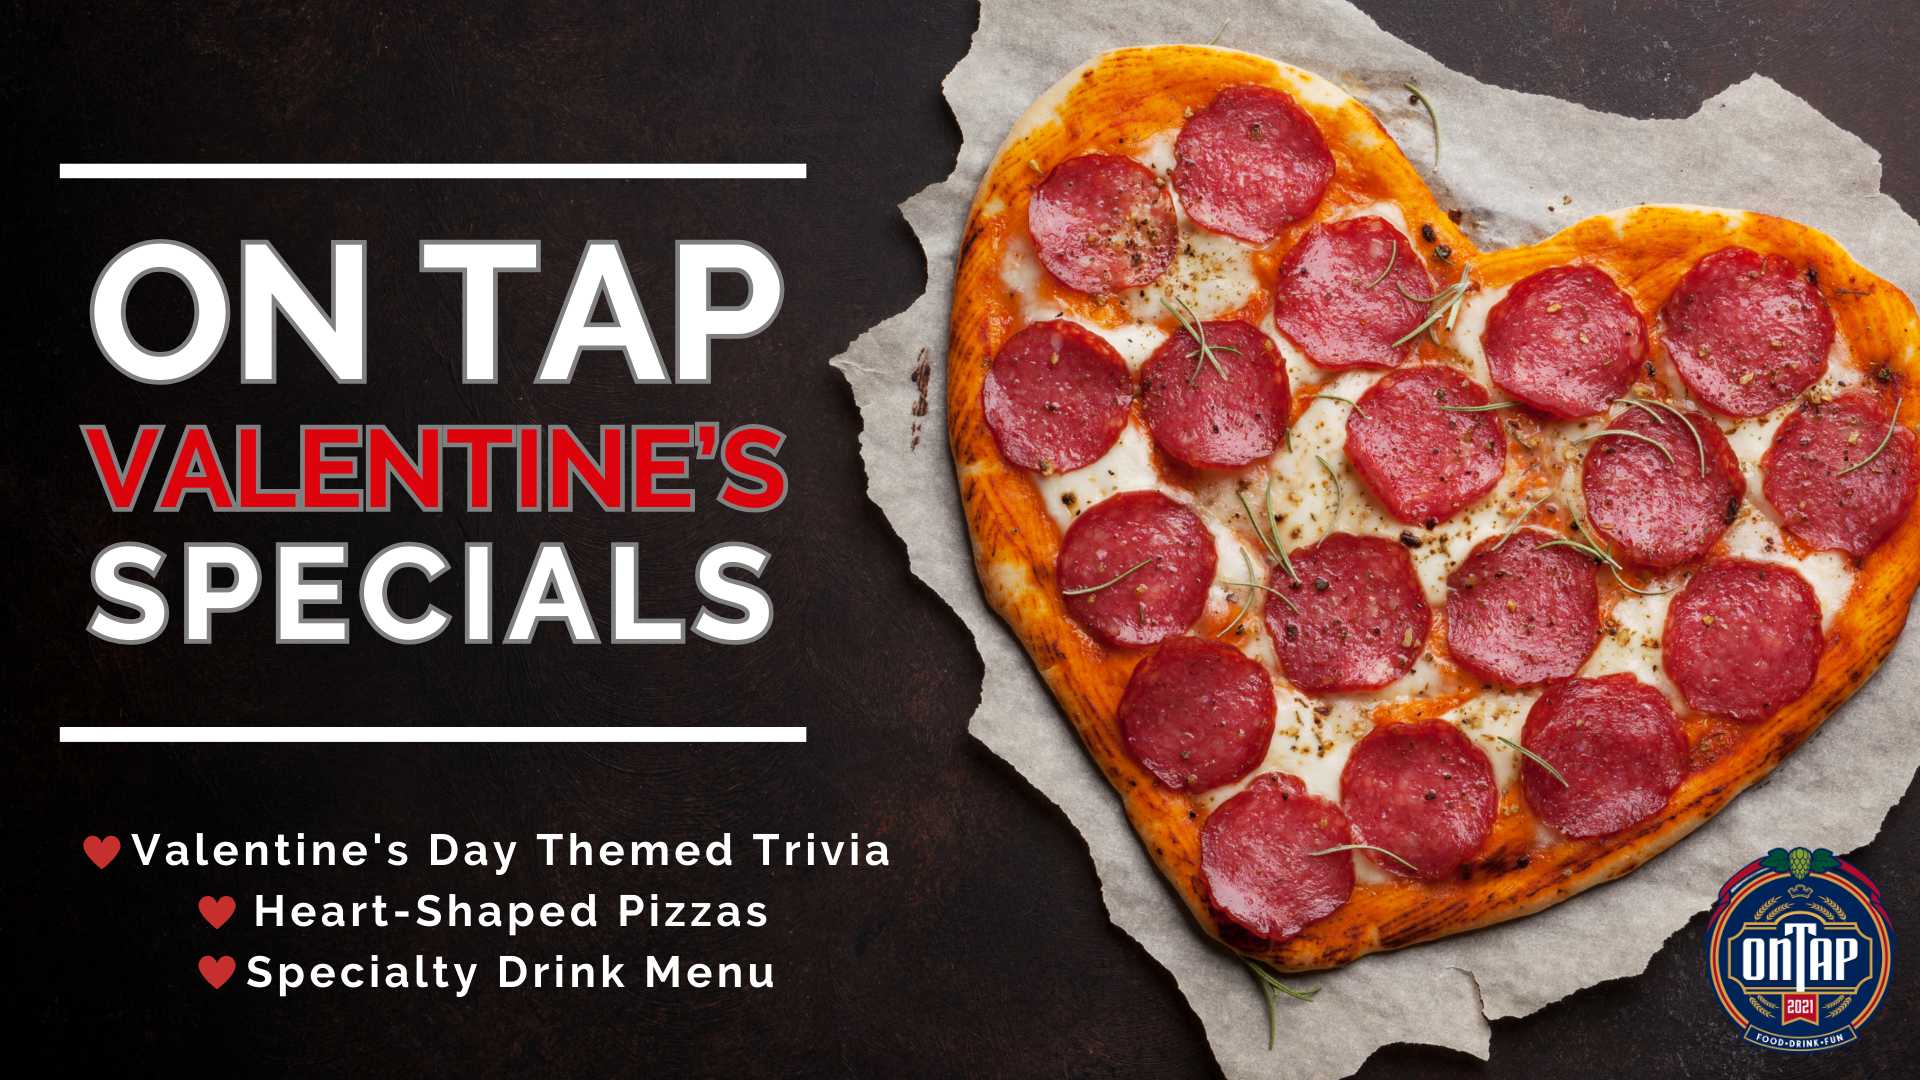 Valentine's Day Specials at On Tap